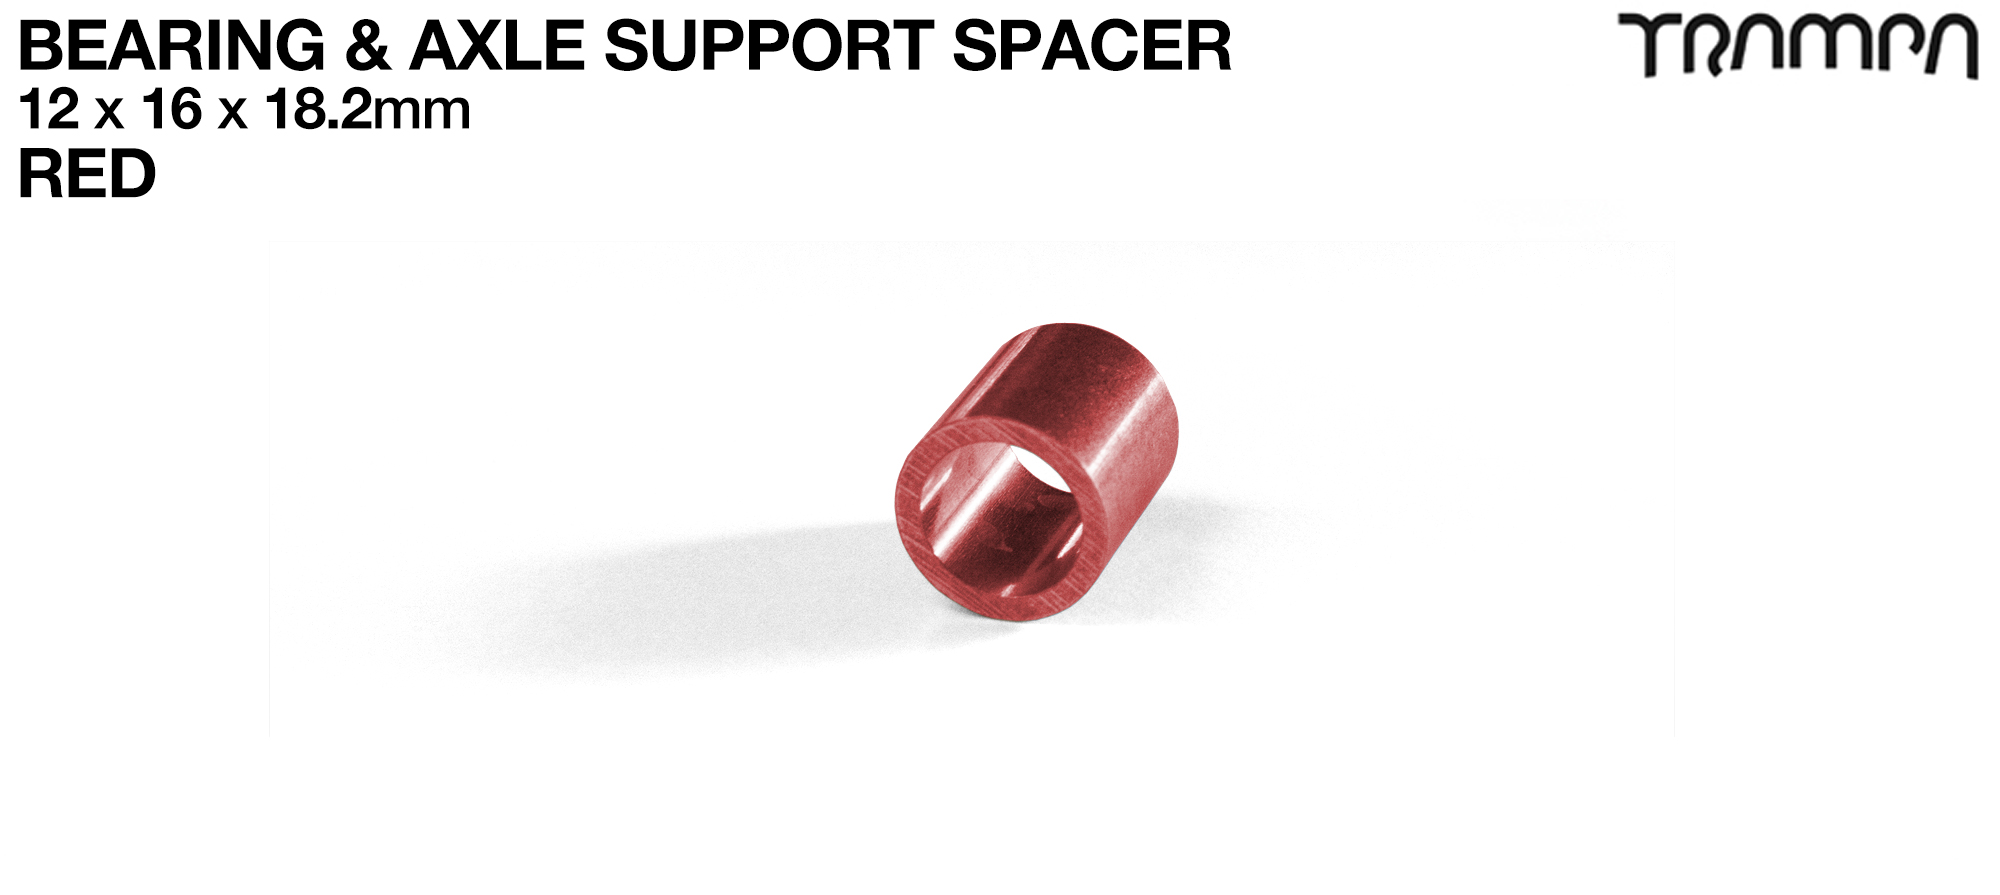 Wheel support spacer for all TRAMPA Wheels on 12mm ATB Axles - CNC precision 12mm x 16mm x 18.2mm  - RED